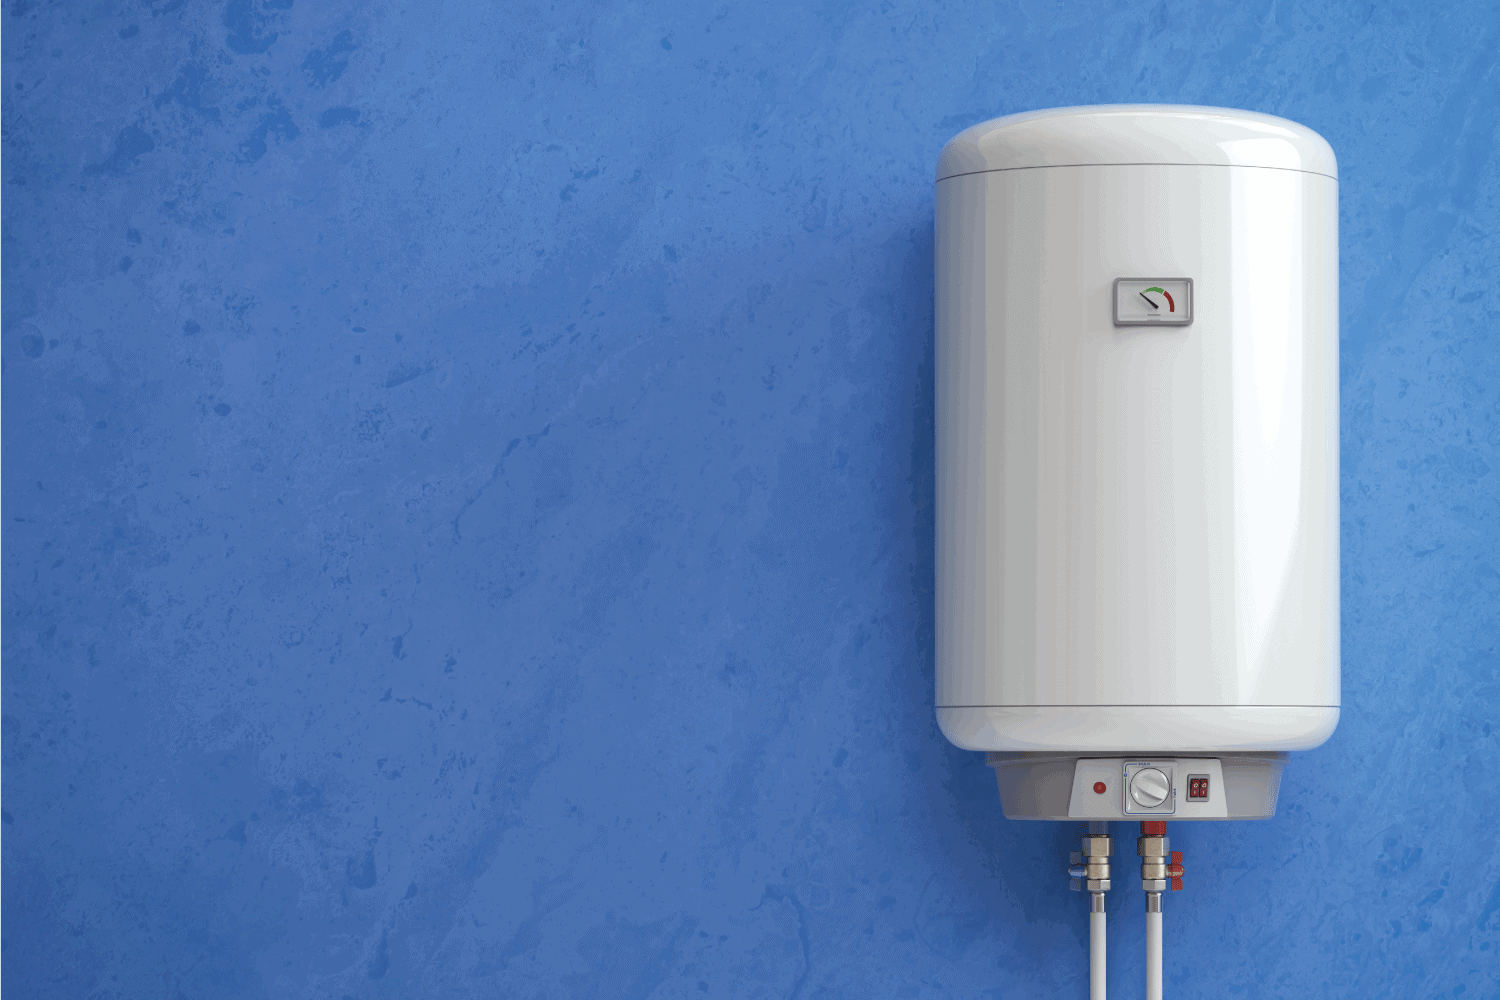 Electric boiler, water heater on the blue wall.